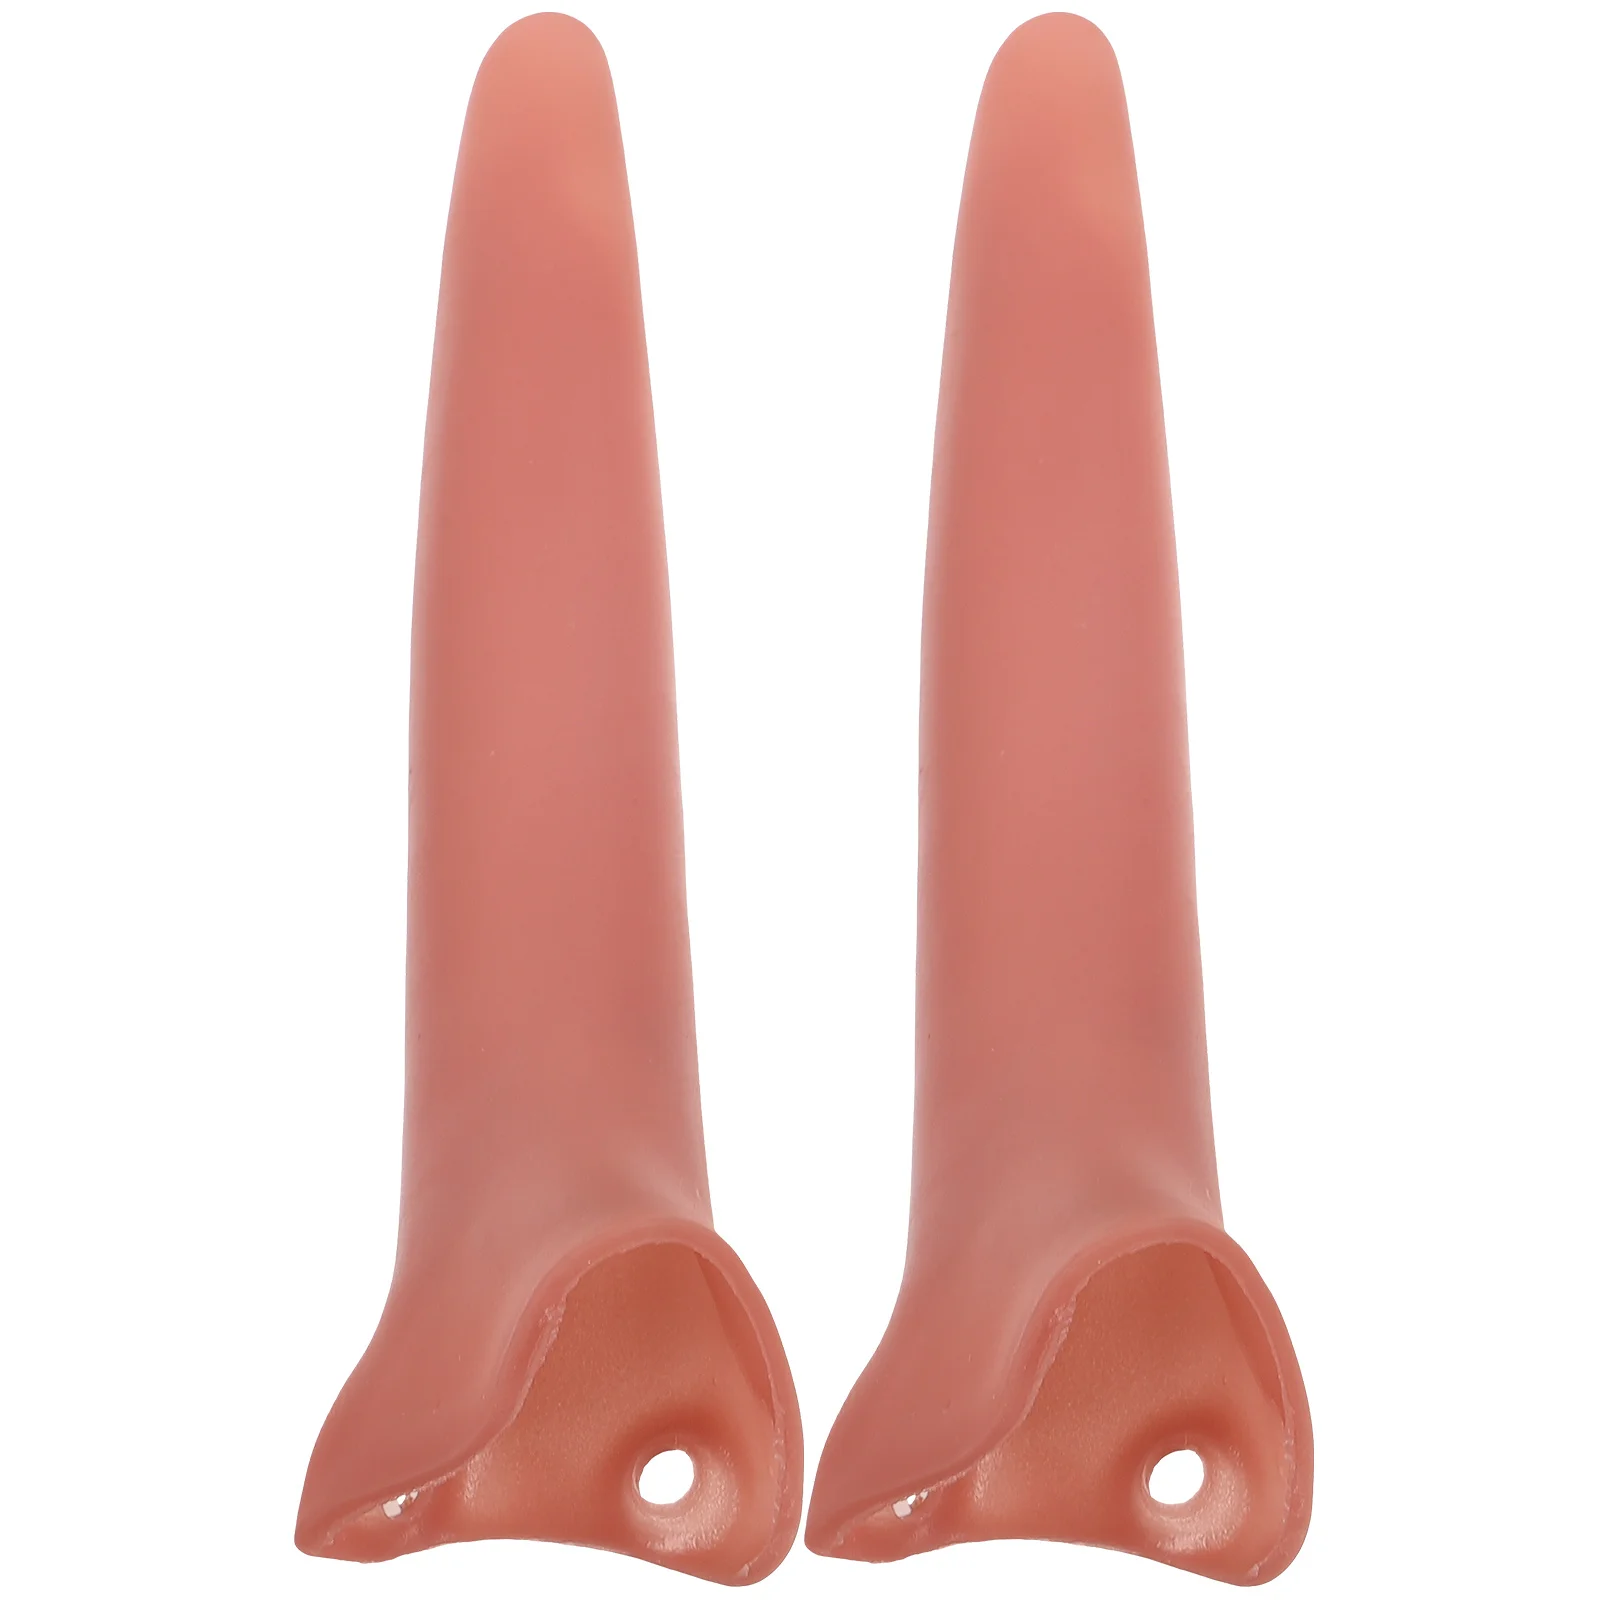 2pcs Witch Nose Funny Vivid Nose for Costume Party Props Accessories Supplies nicexmas latex long nose long wooden nose props children s toys for halloween masquerade carnivals party